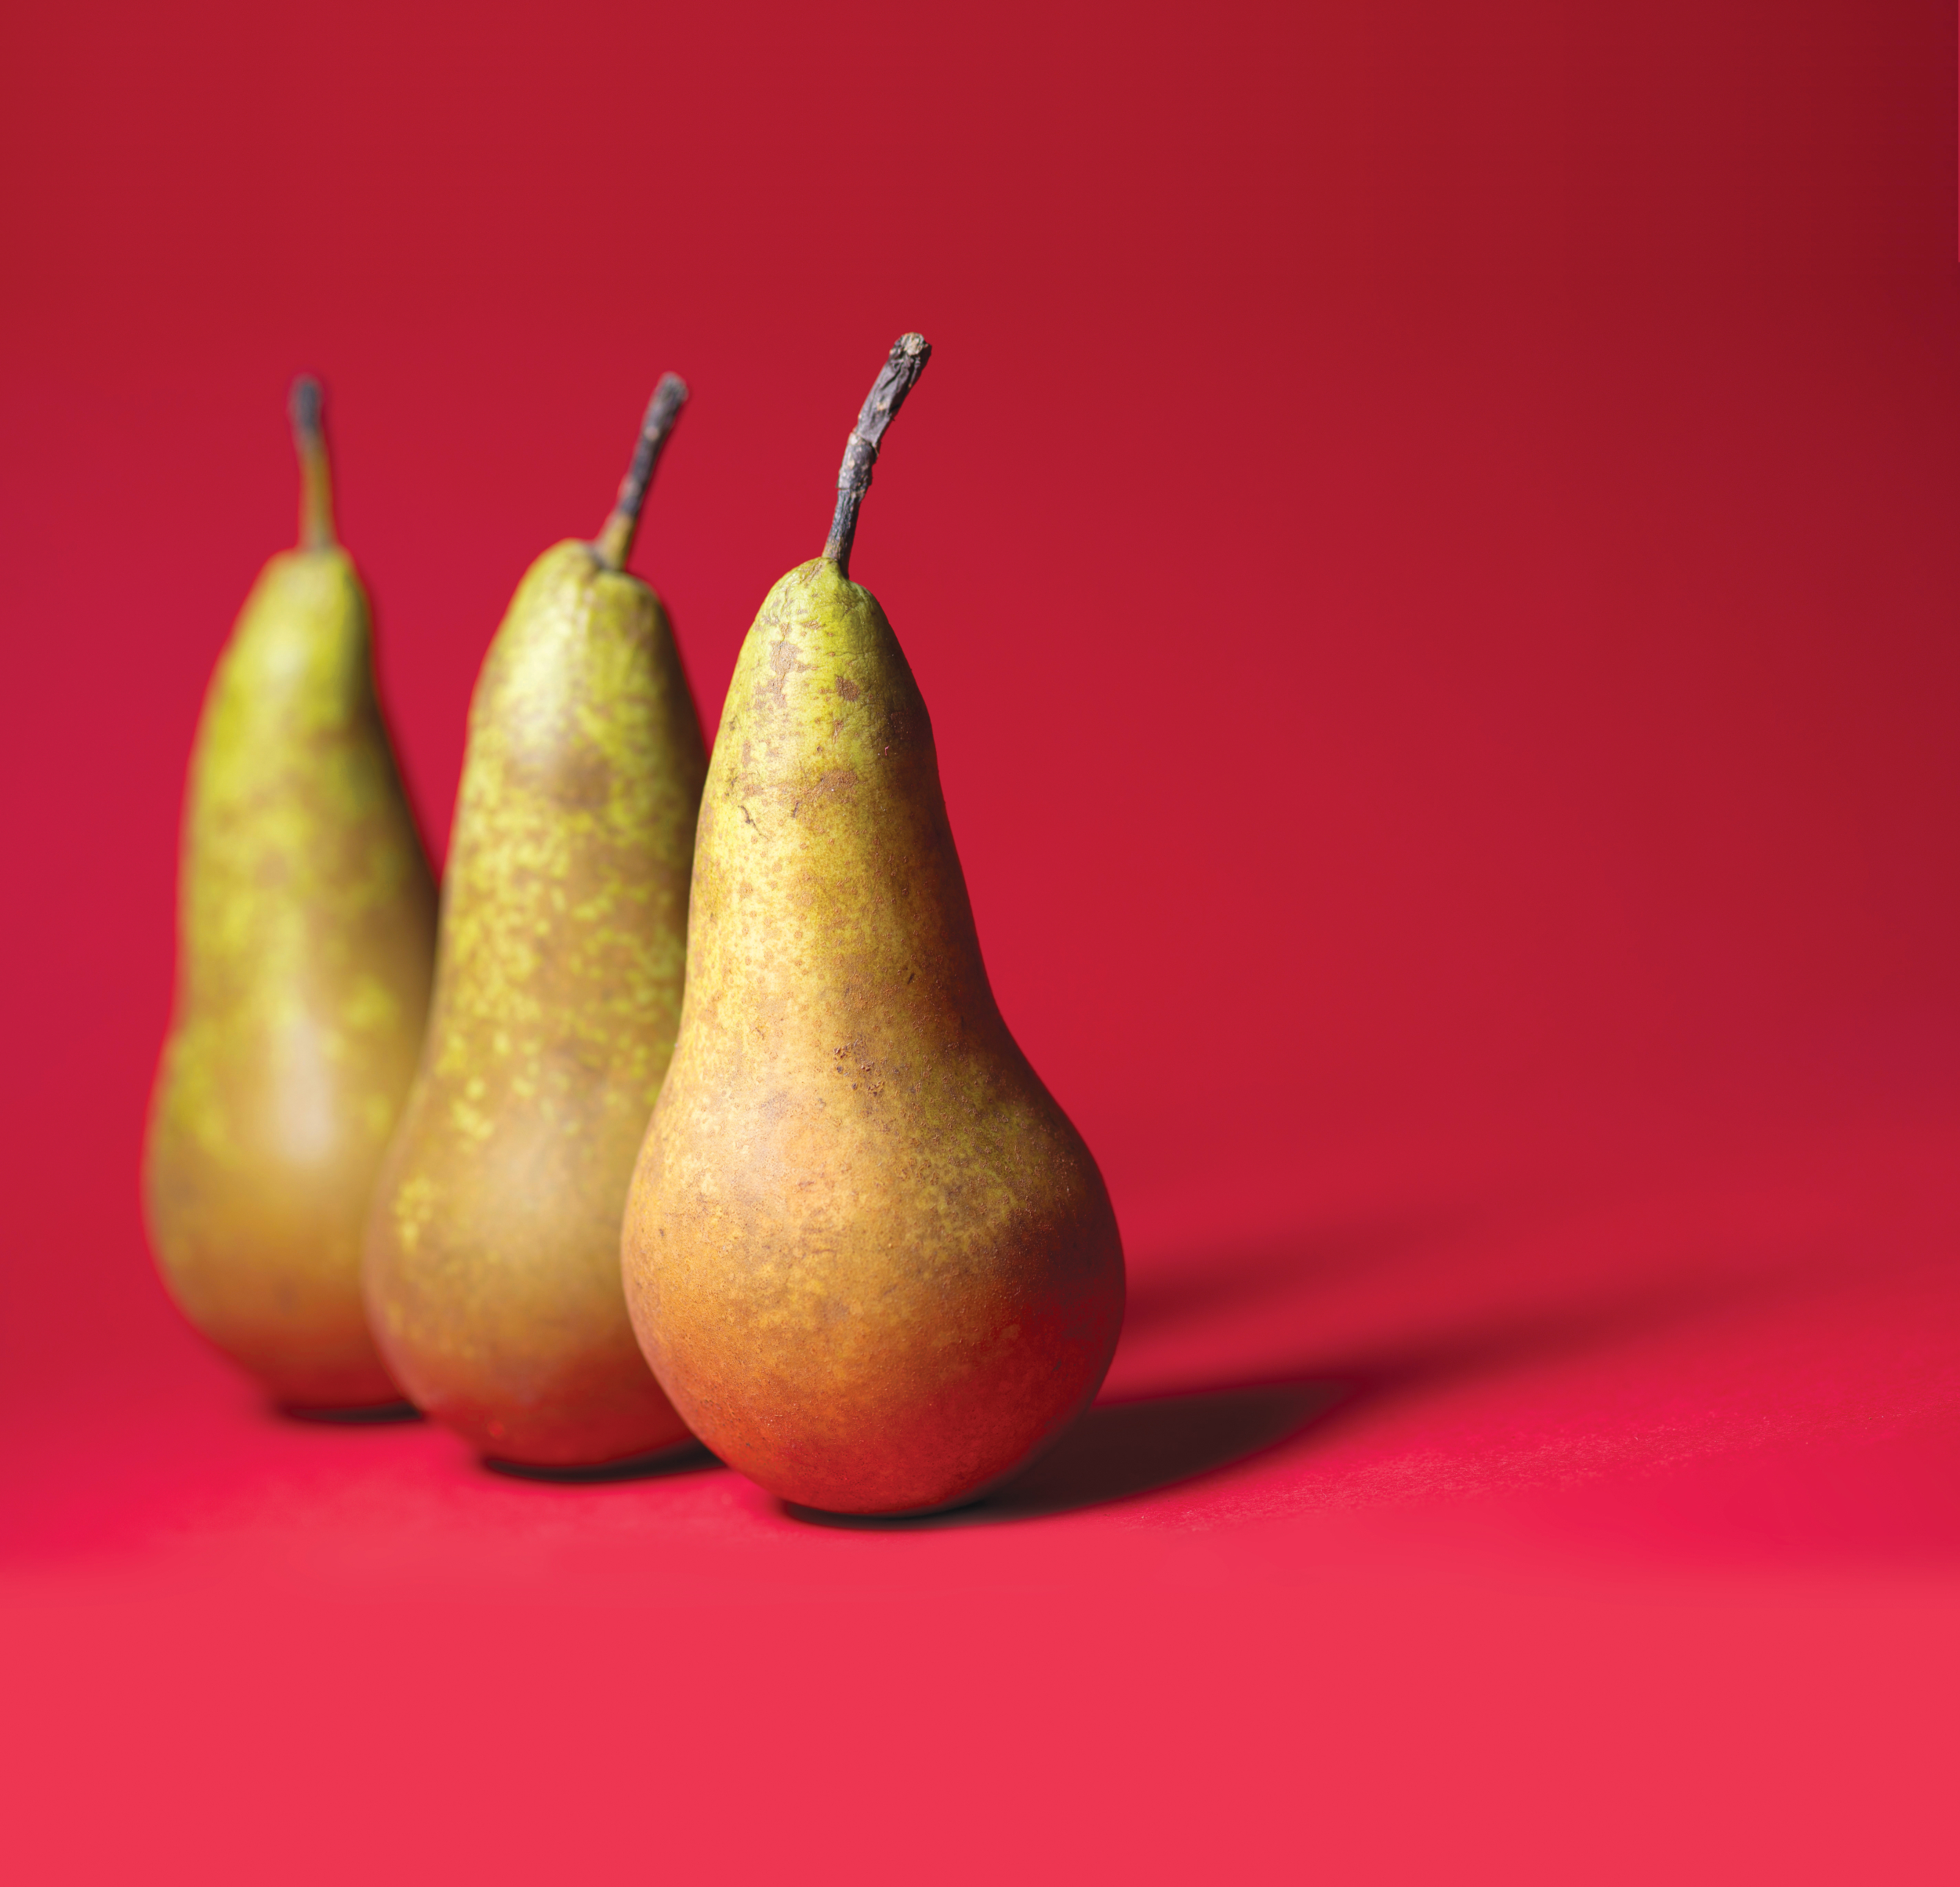 Three pears on a red background, the closest thing we have to a Fisker PEAR electric vehicle.